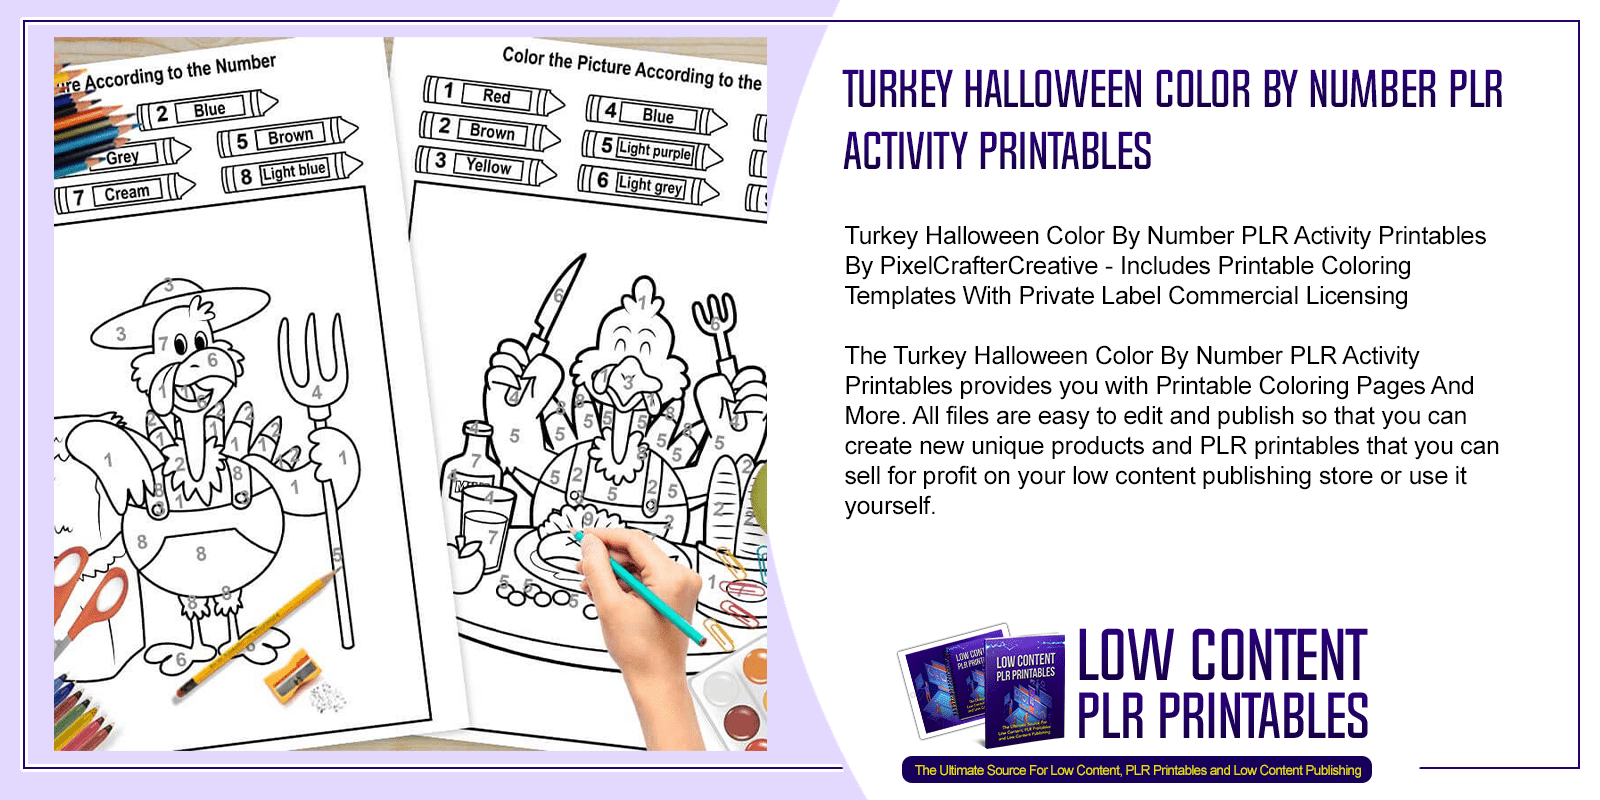 Turkey Halloween Color By Number PLR Activity Printables